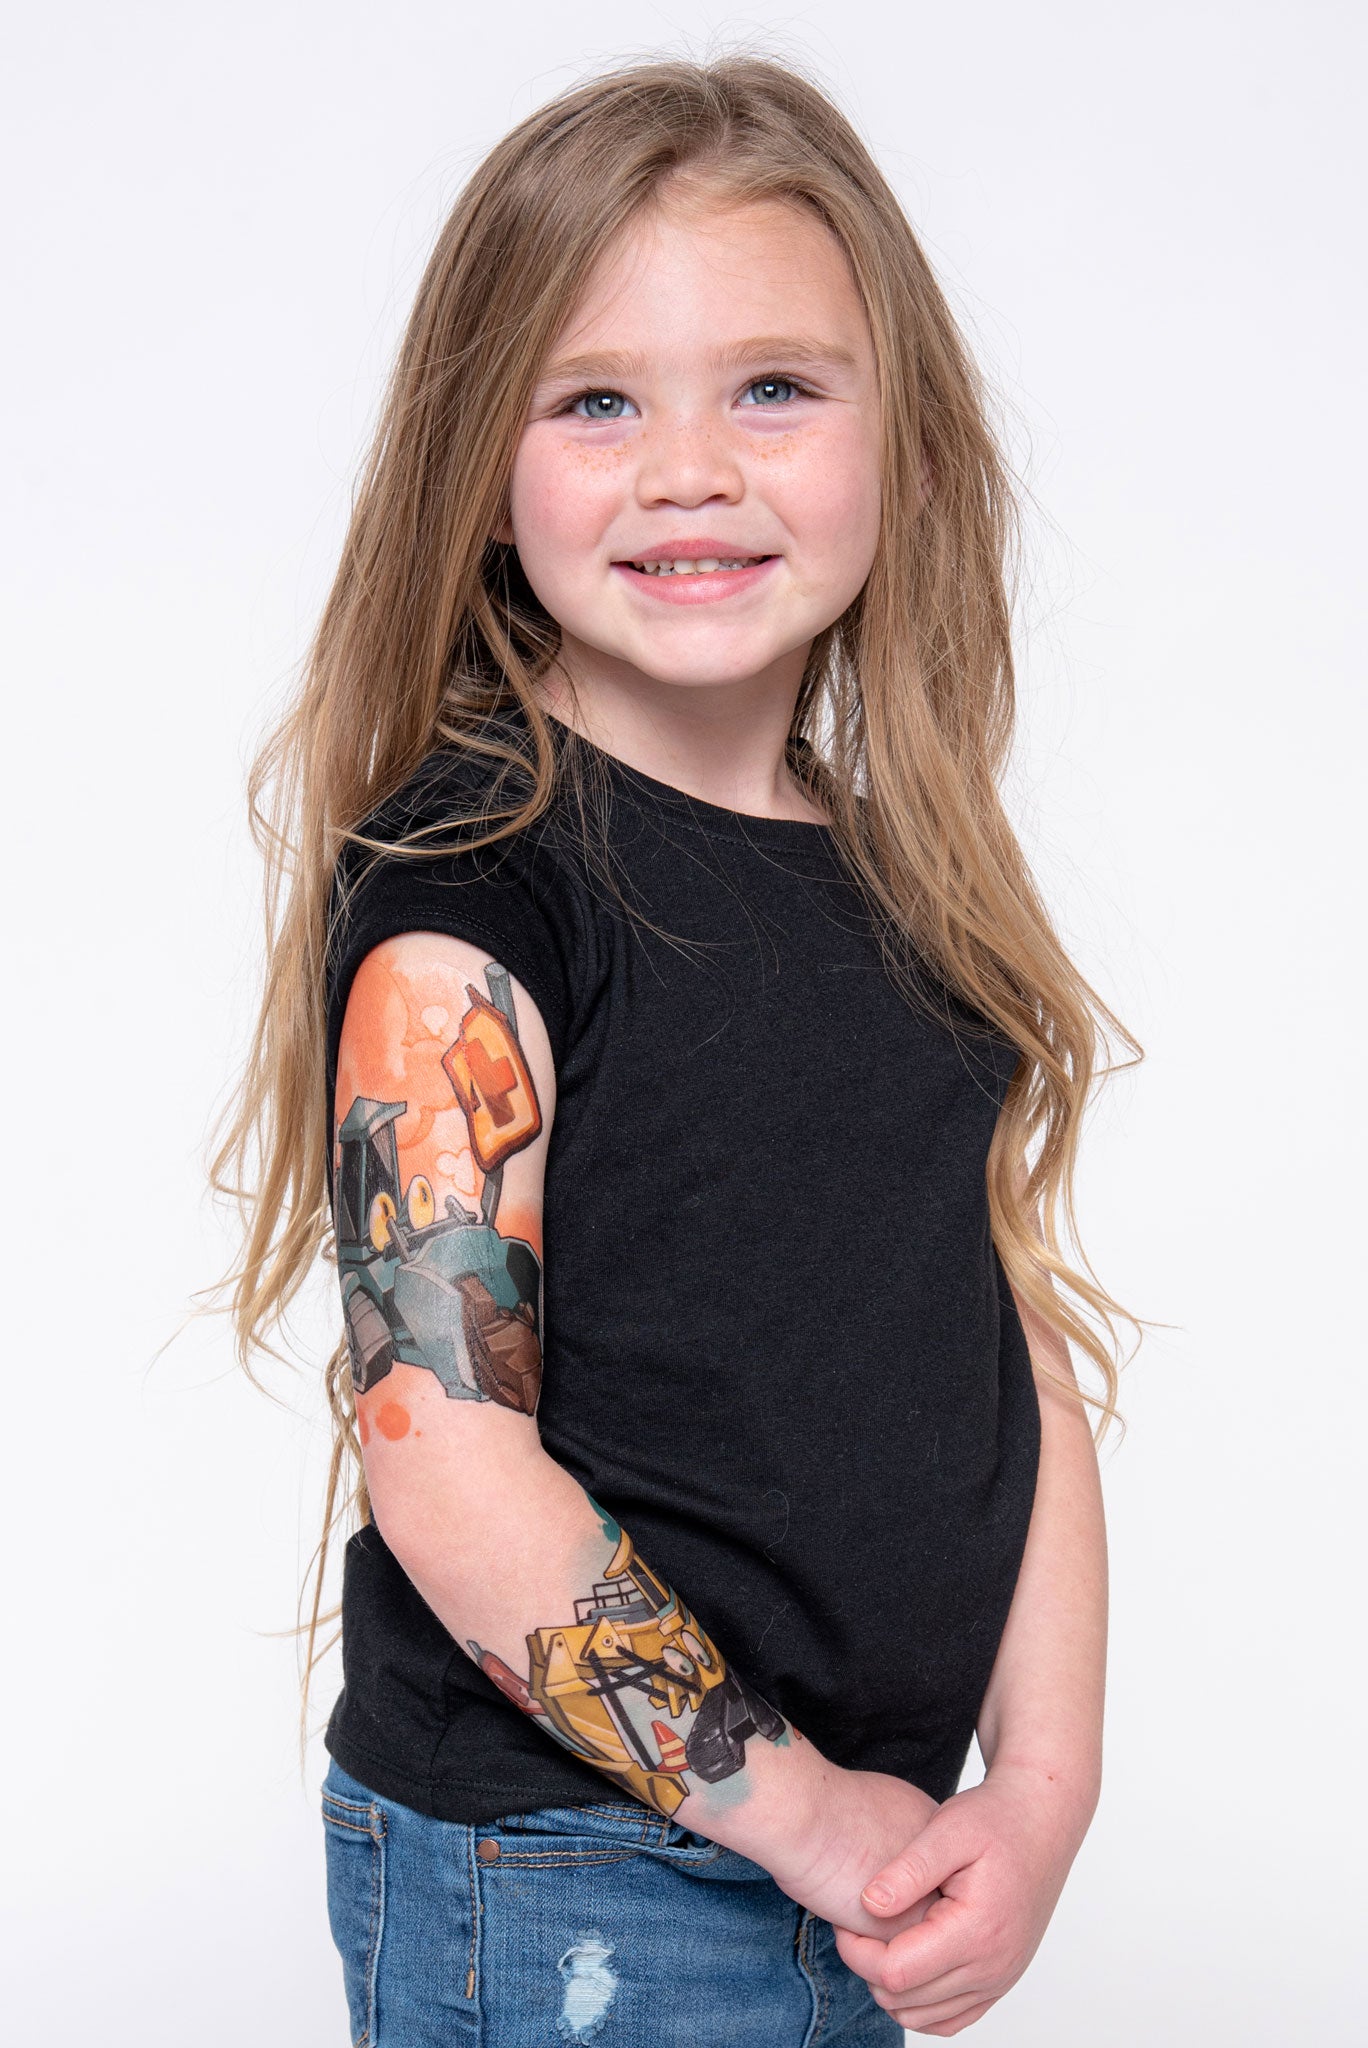 Young girl shows off her construction temporary tattoo sleeve.